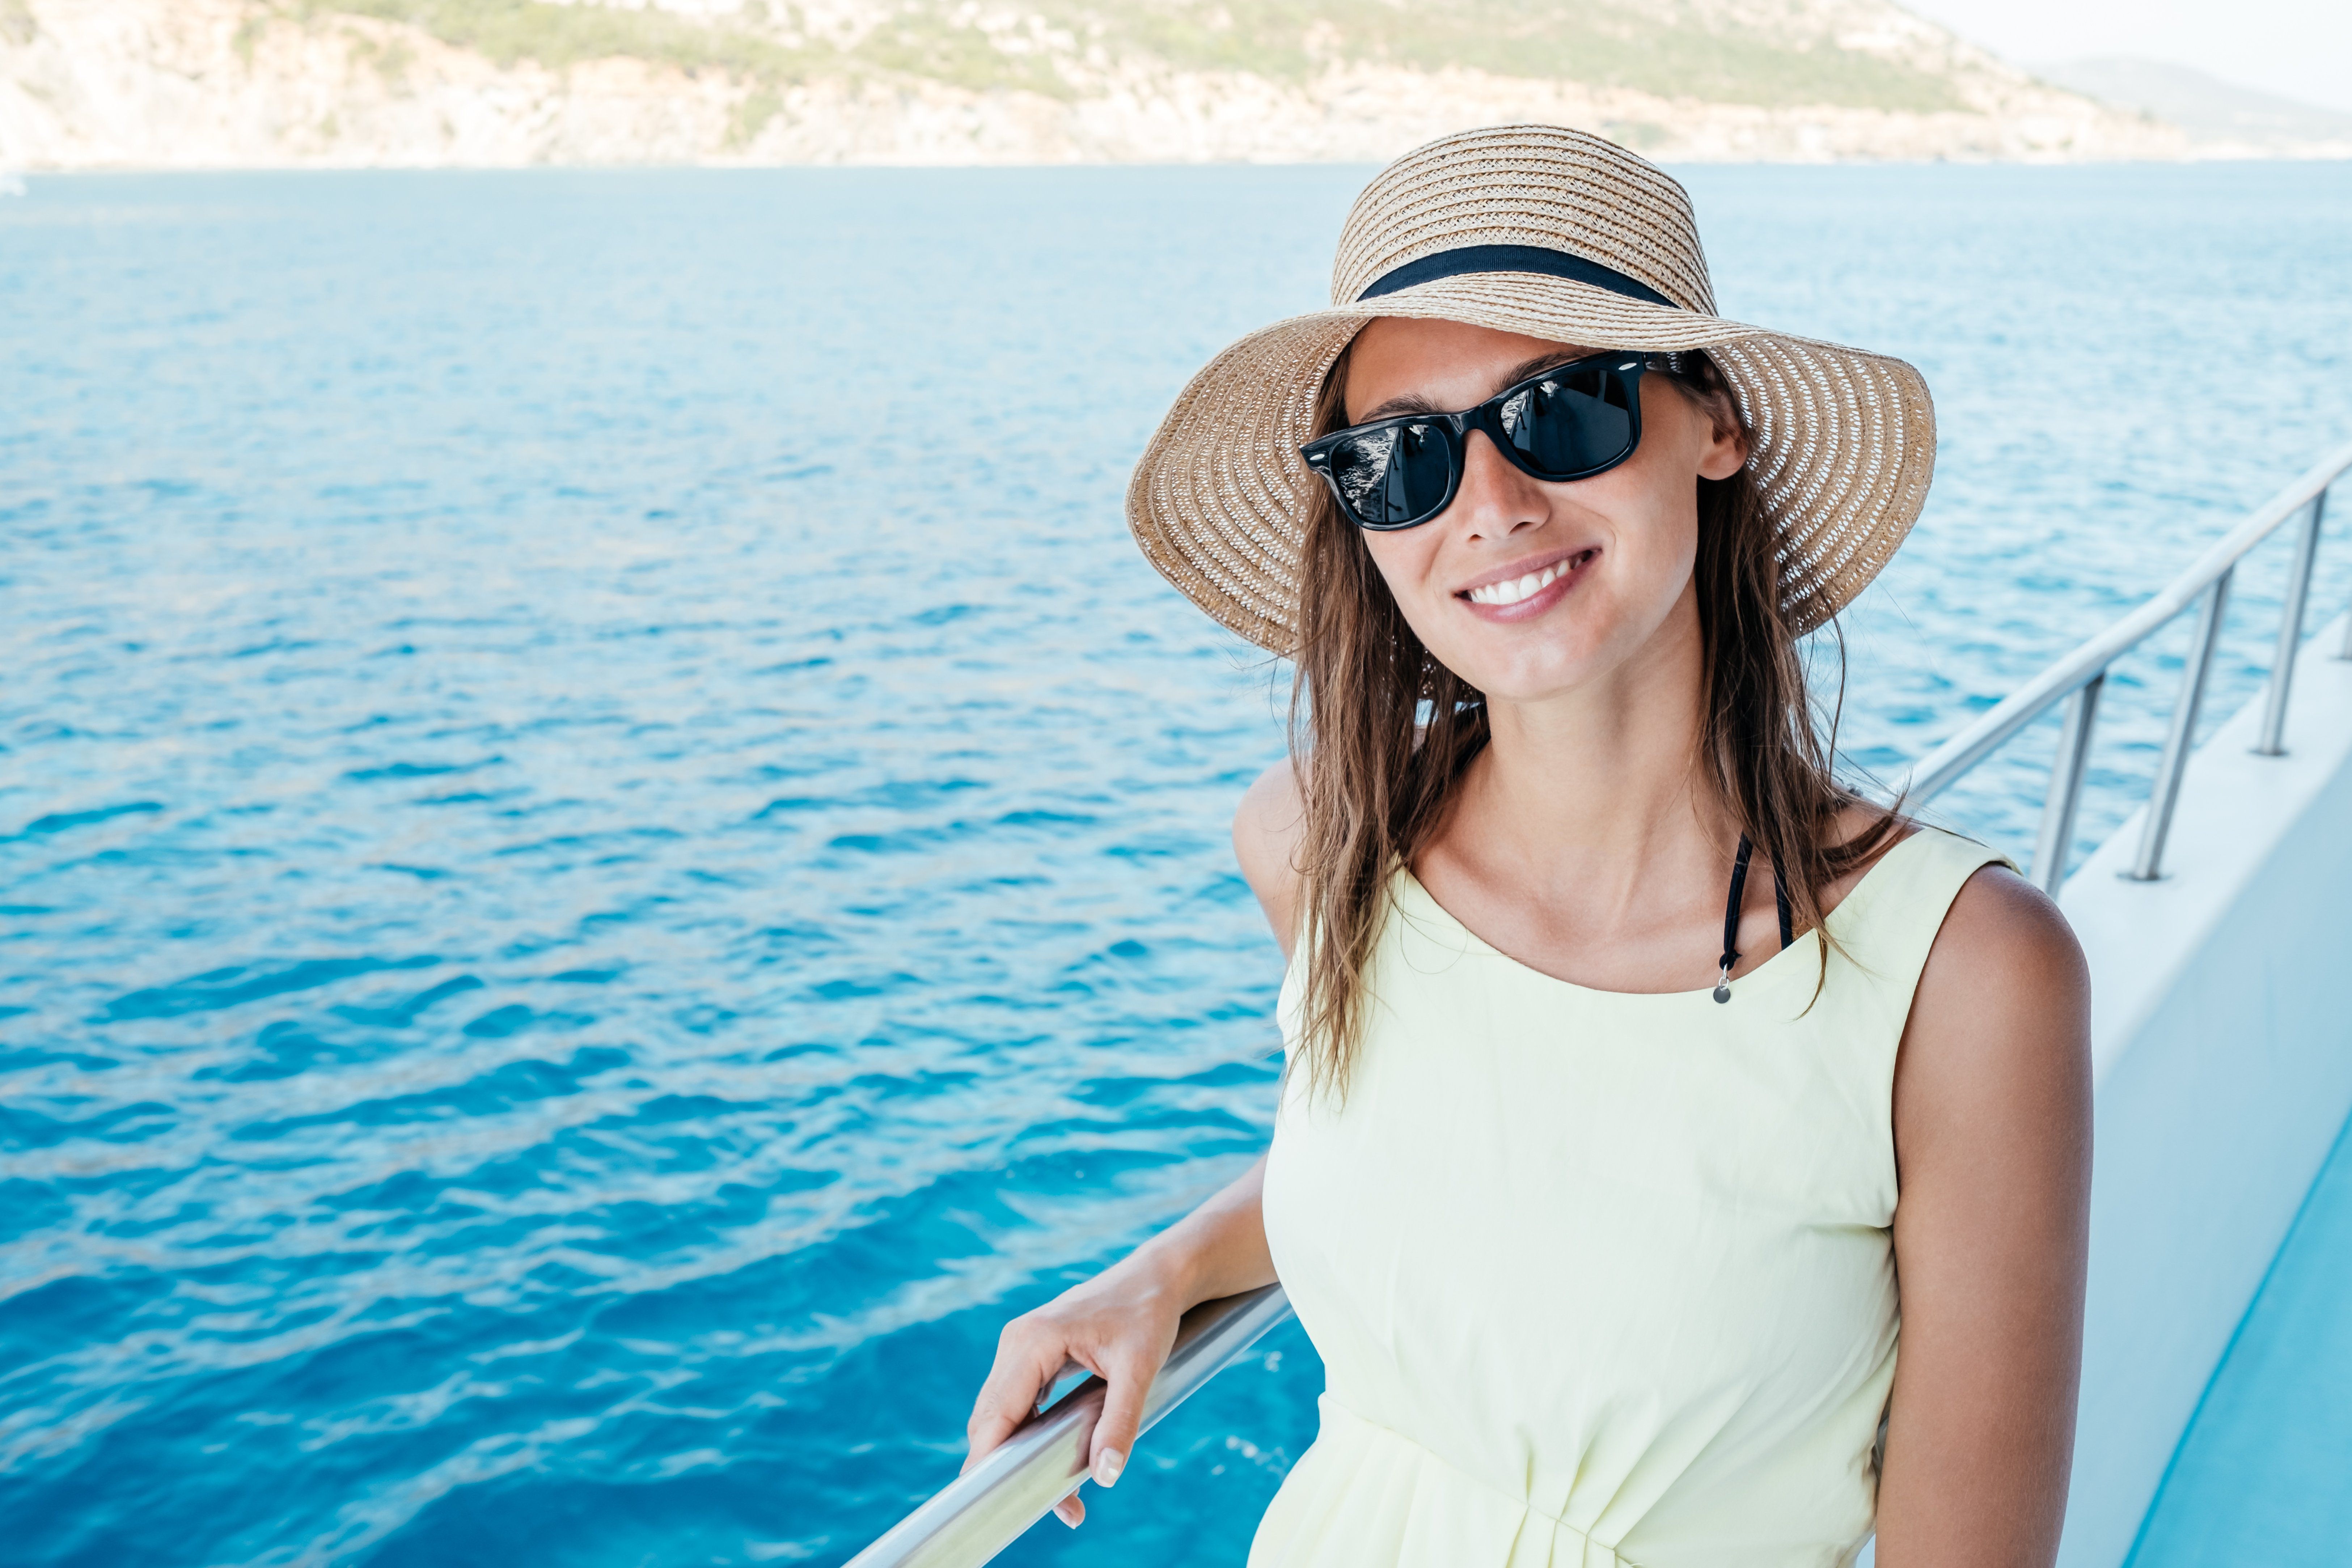 How You Can Protect Your Eyes in Summer